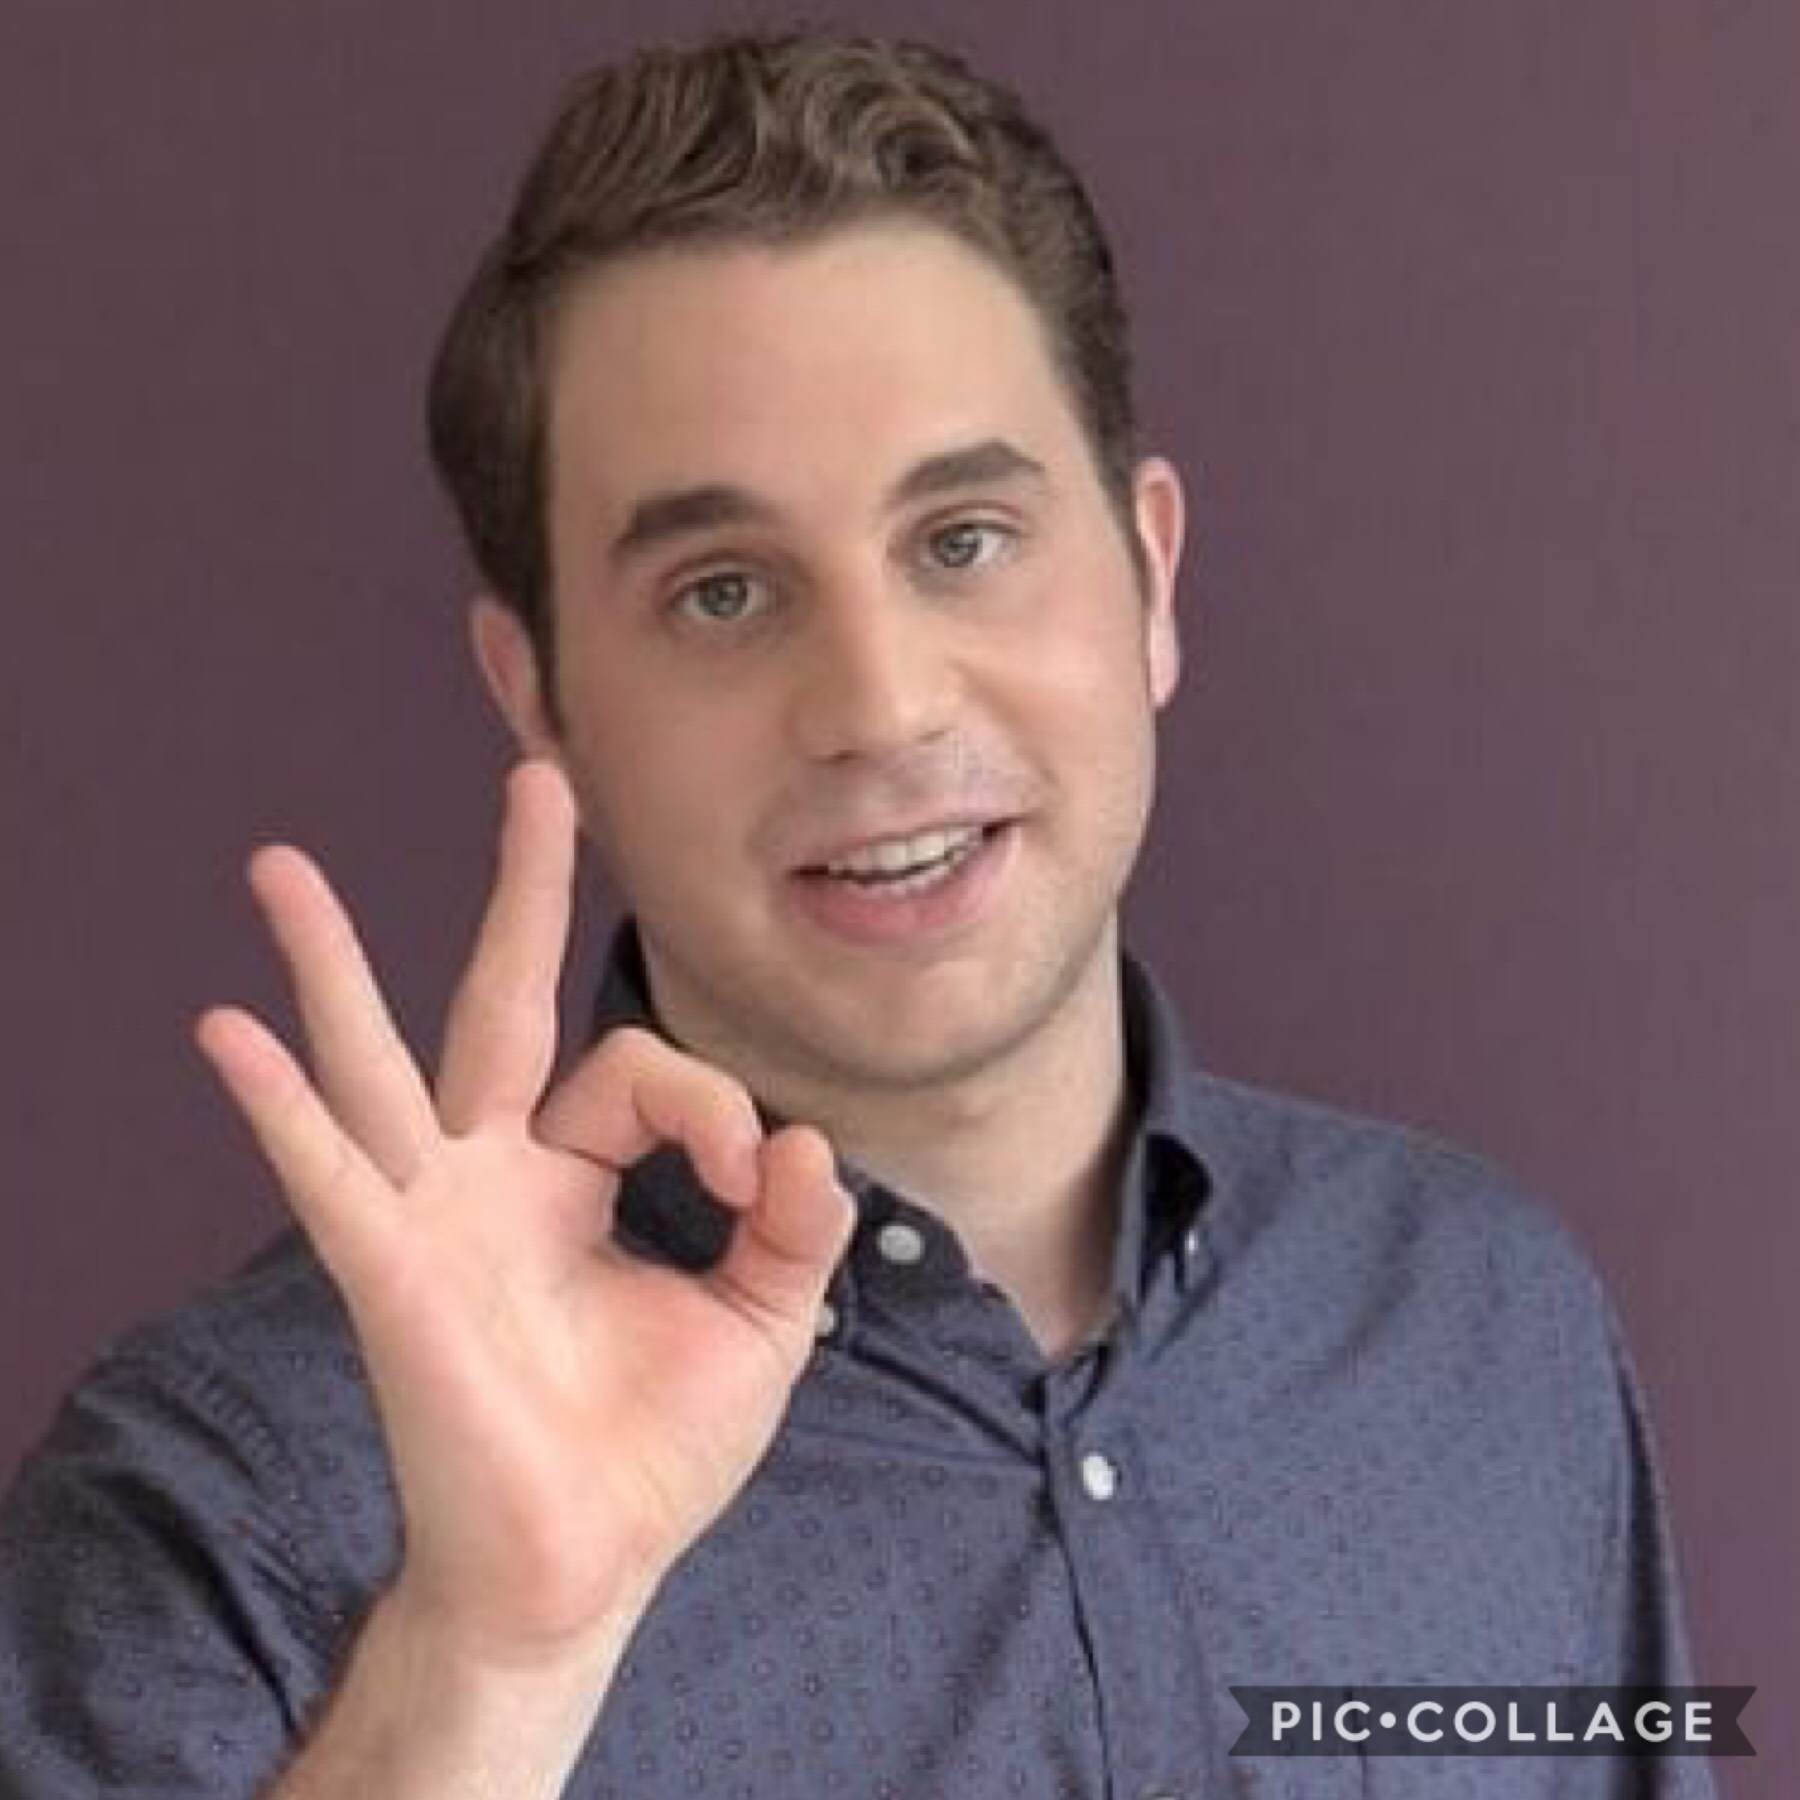 (The title for this picture was “is Ben platt gay? Who’s is boyfriend or girlfriend? We have answers.”) HMMM. I actually have no idea but actually don’t care if he’s gay or not 😂 